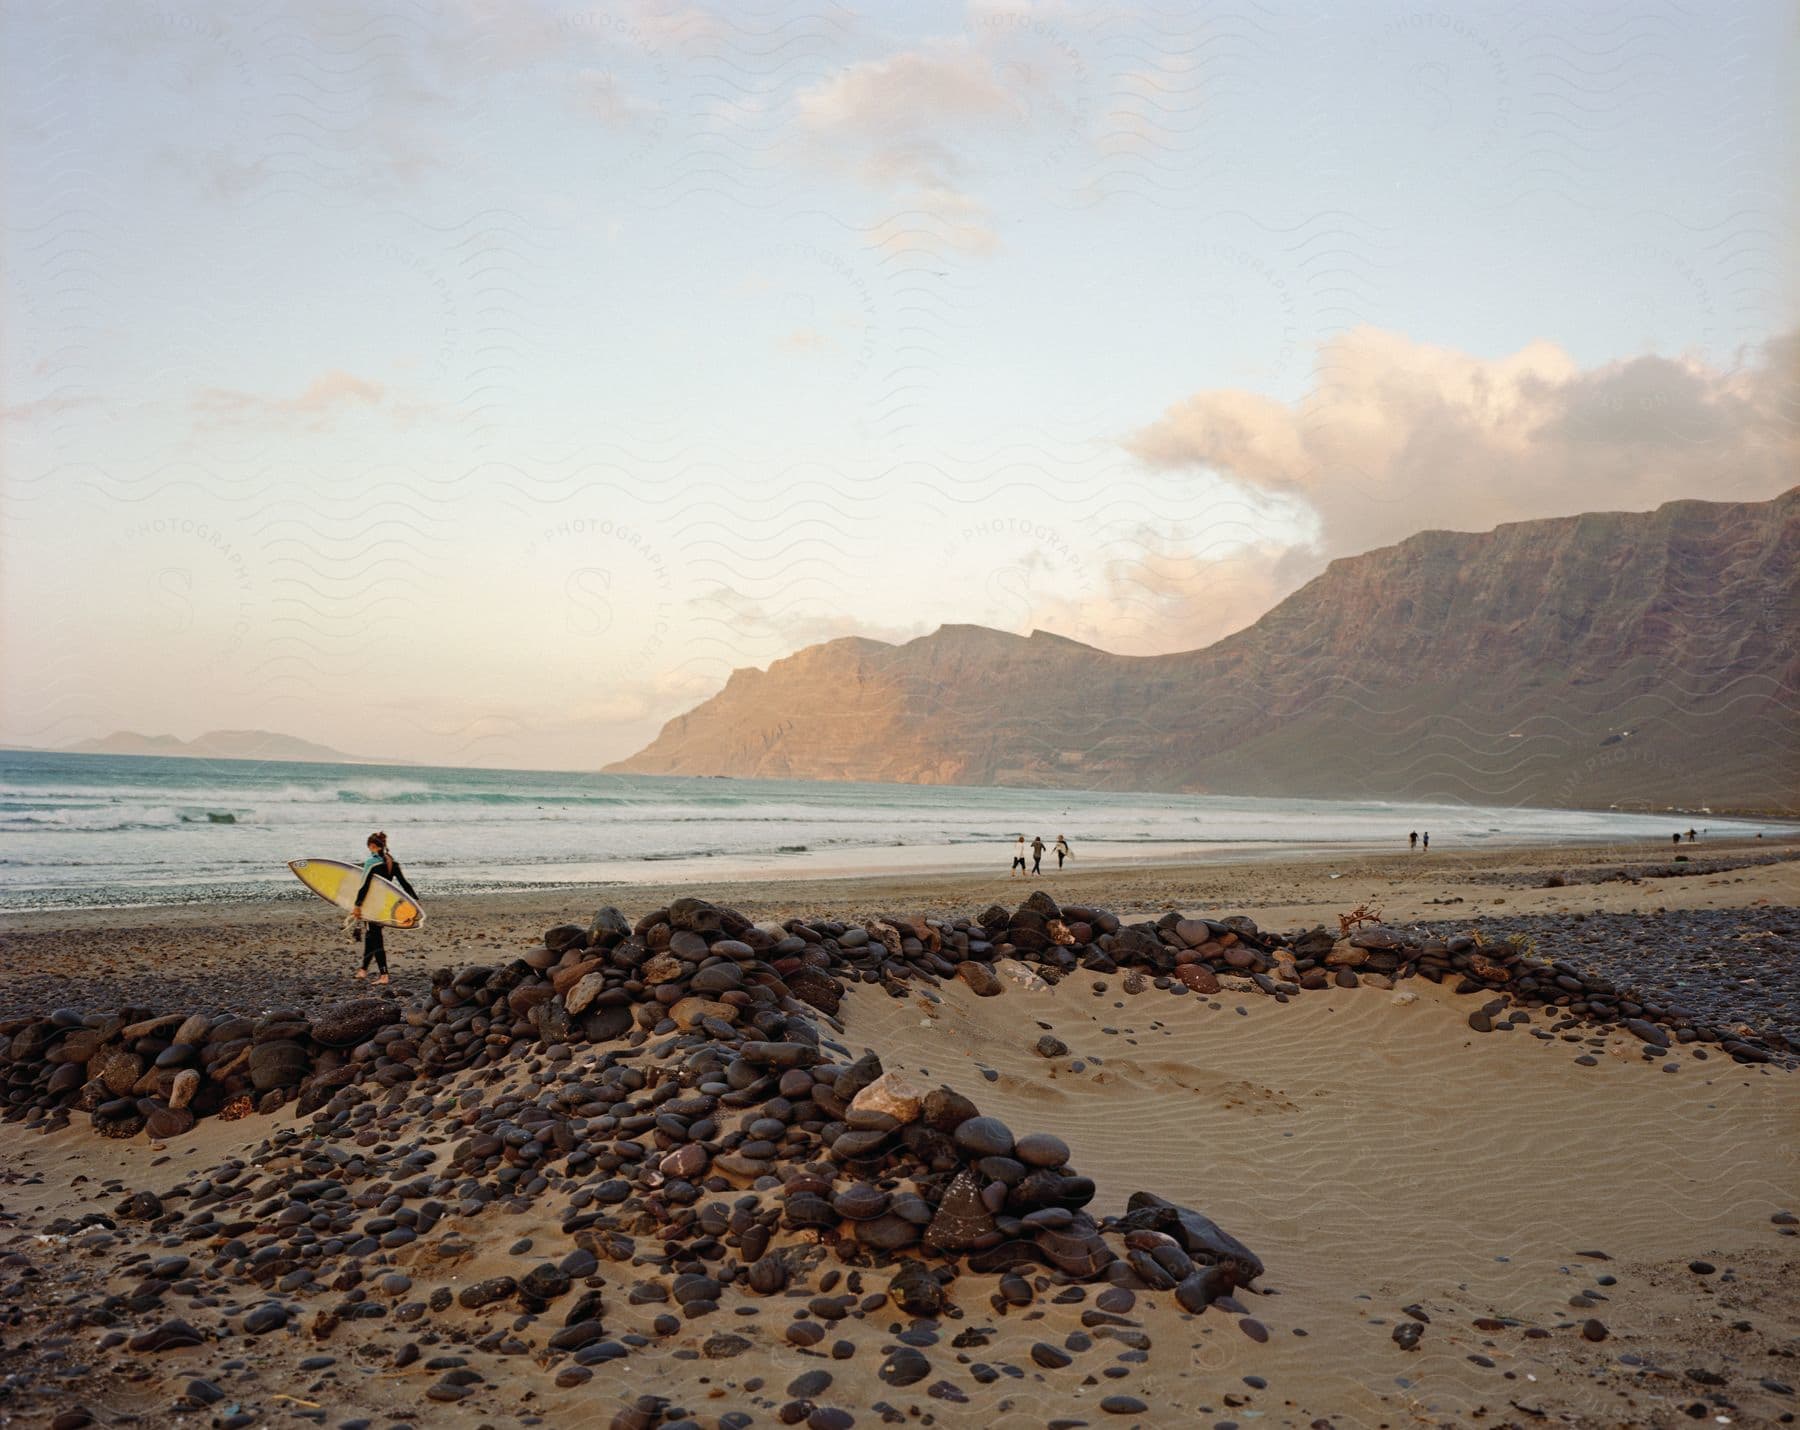 A beach at dusk with rocks on the shore a mountain in the background and groups of people walking on the beach one holding a surfboard